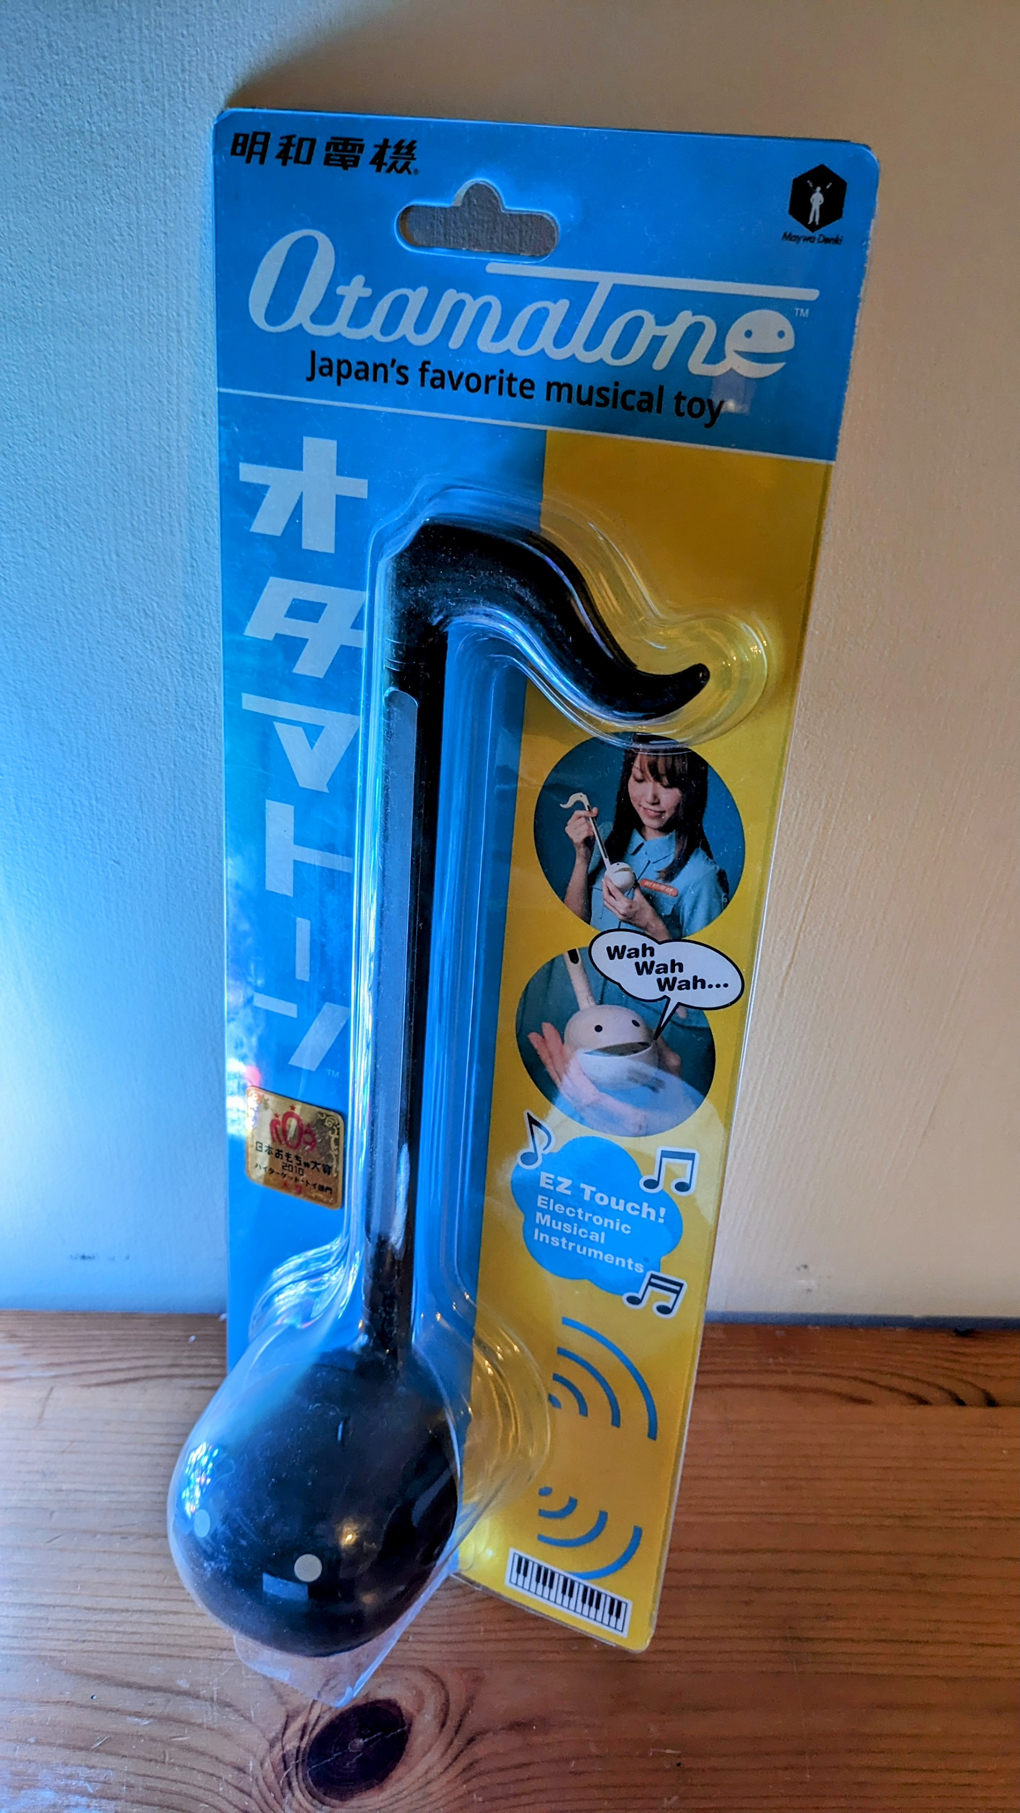 An Otamatone in it's packaging which demonstrates its use. It is shaped like a musical note. The stem is for choosing the note and the sound comes out of a little mouth/face drawn on the ball.